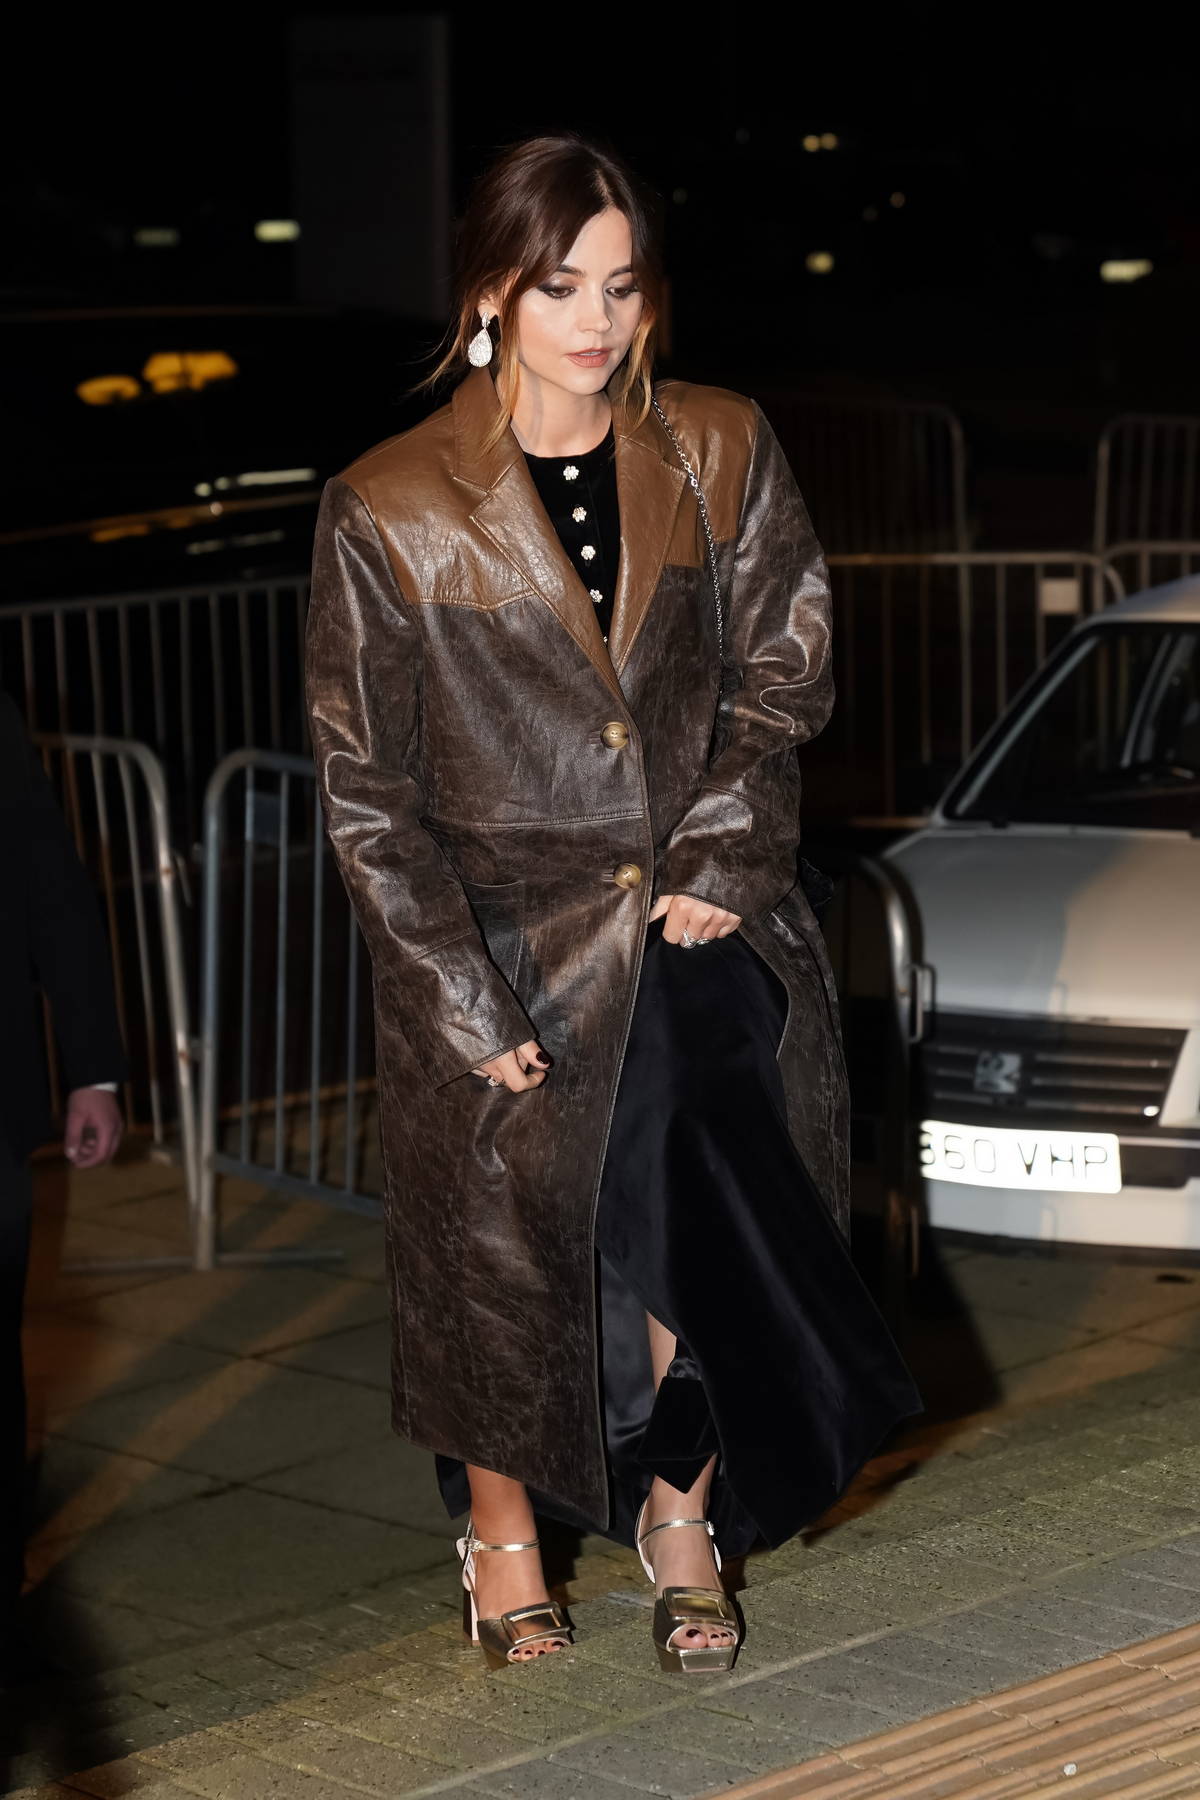 Jenna Coleman looks stylish in a brown leather coat while she picks up food to-go in Stockton-on-Tees, England